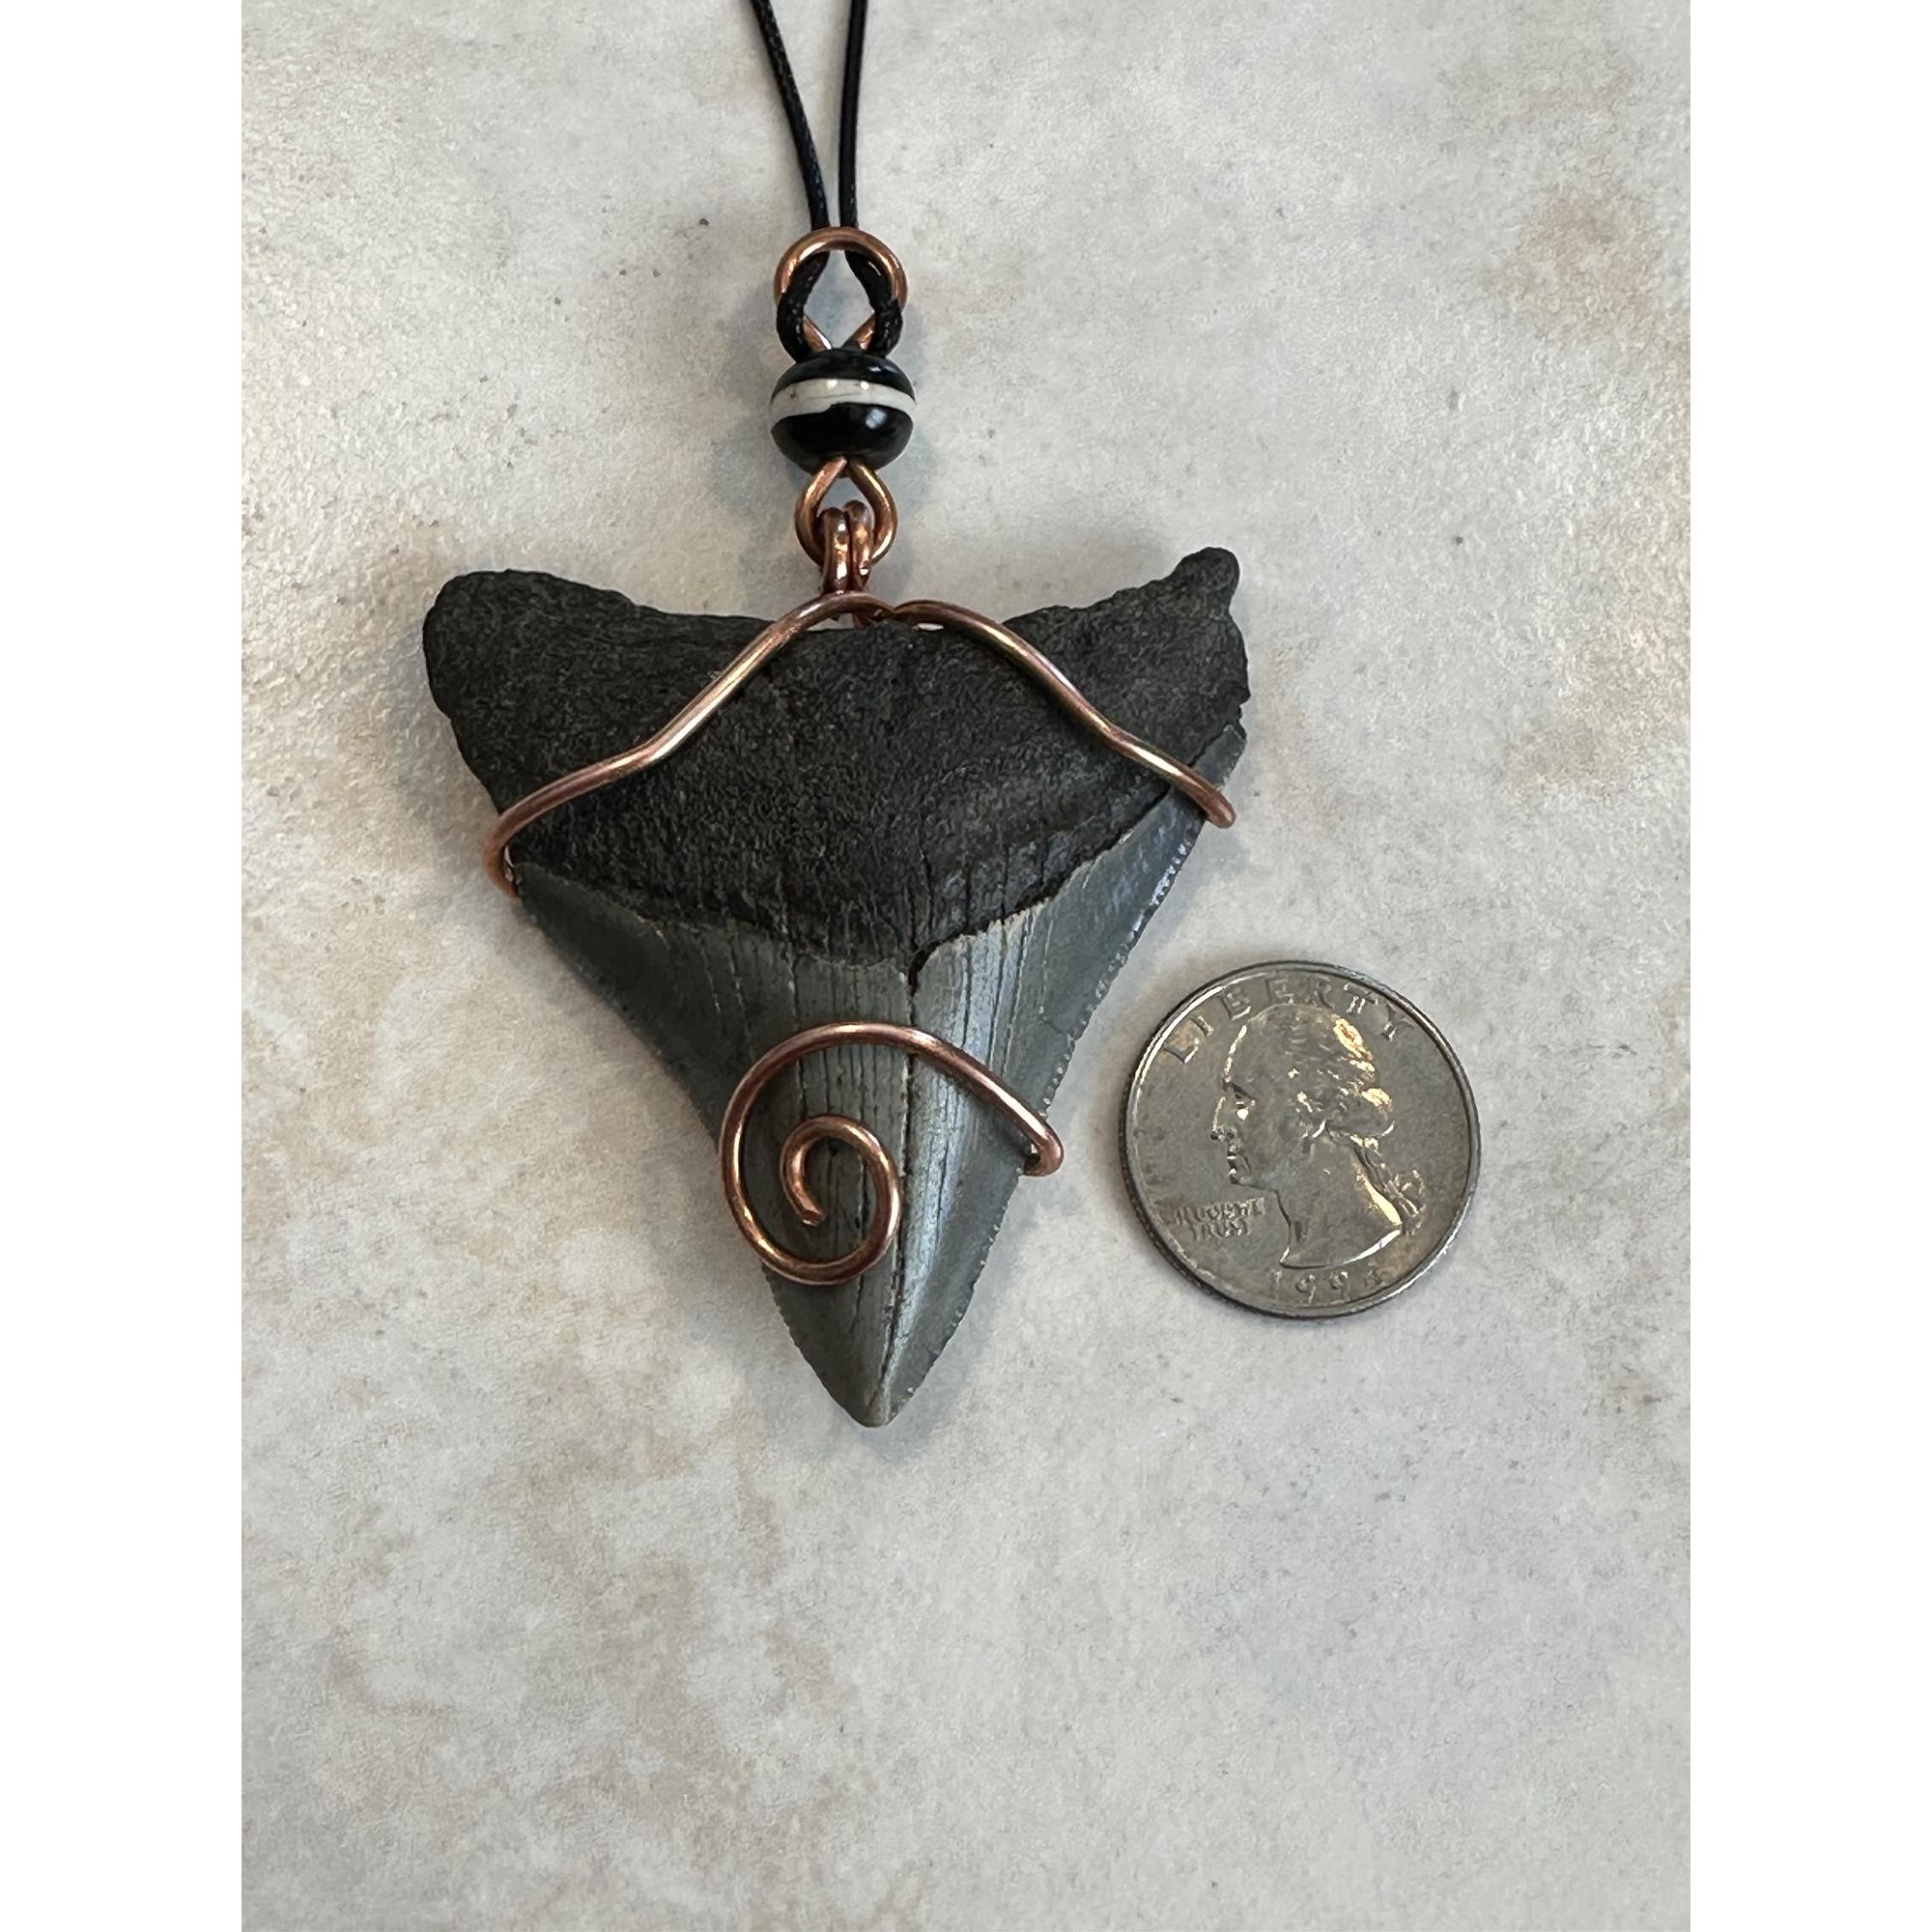 Megalodon Pendant, complete tooth wrapped in copper Prehistoric Online